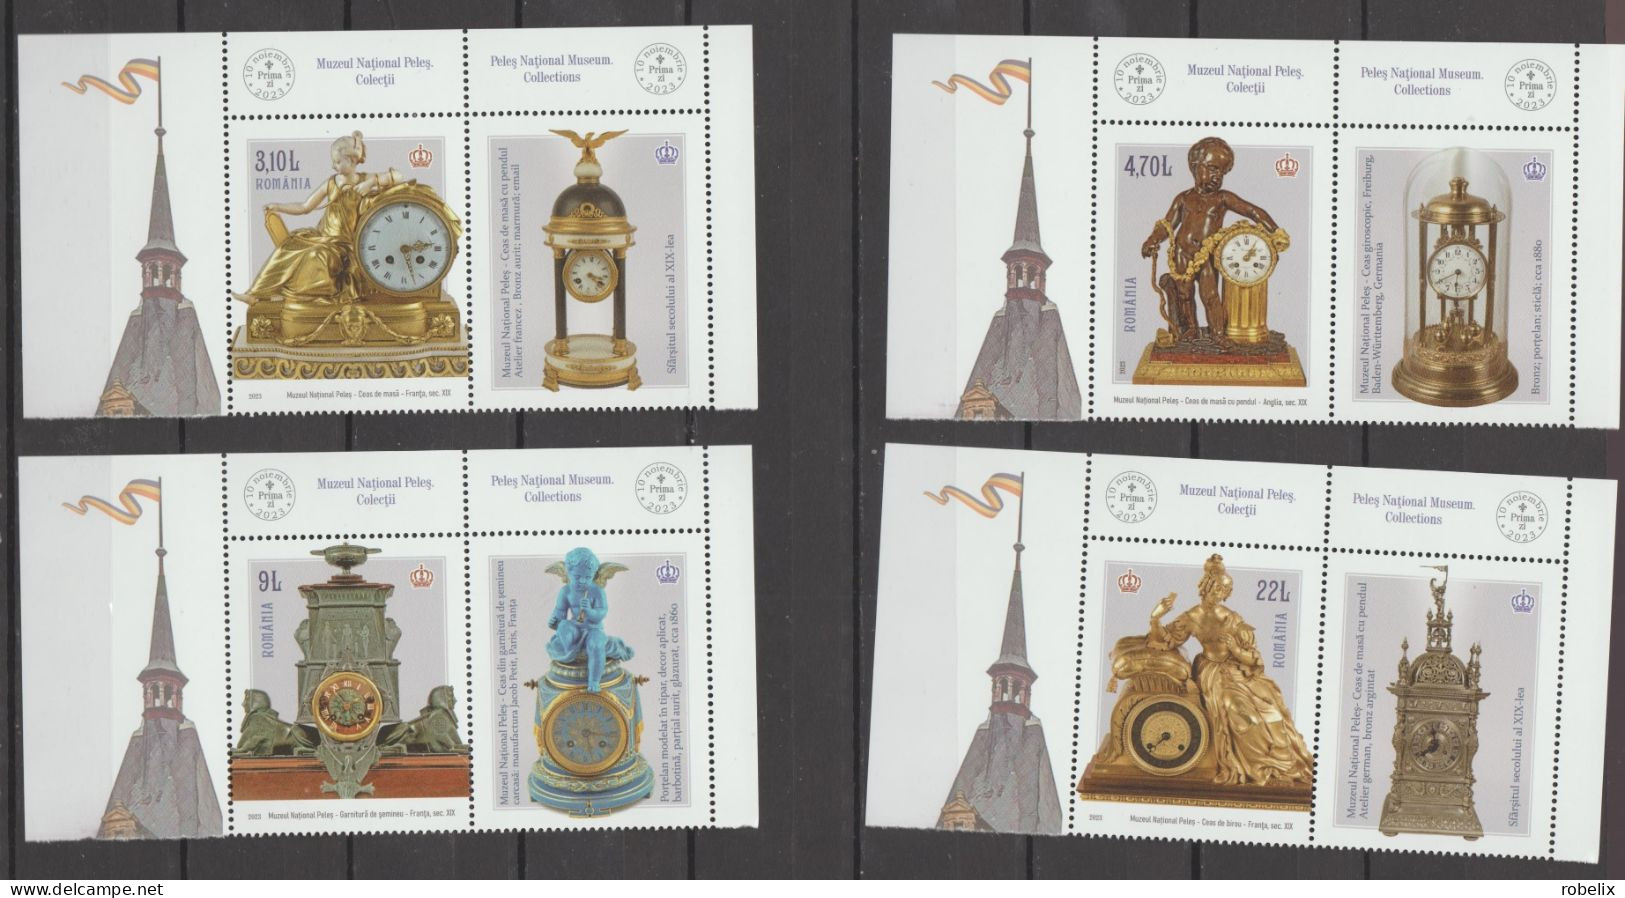 ROMANIA 2023  PELEȘ NATIONAL MUSEUM - COLLECTIONS - CLOCKS  Set Of 4 Stamps With Labels  MNH** - Orologeria